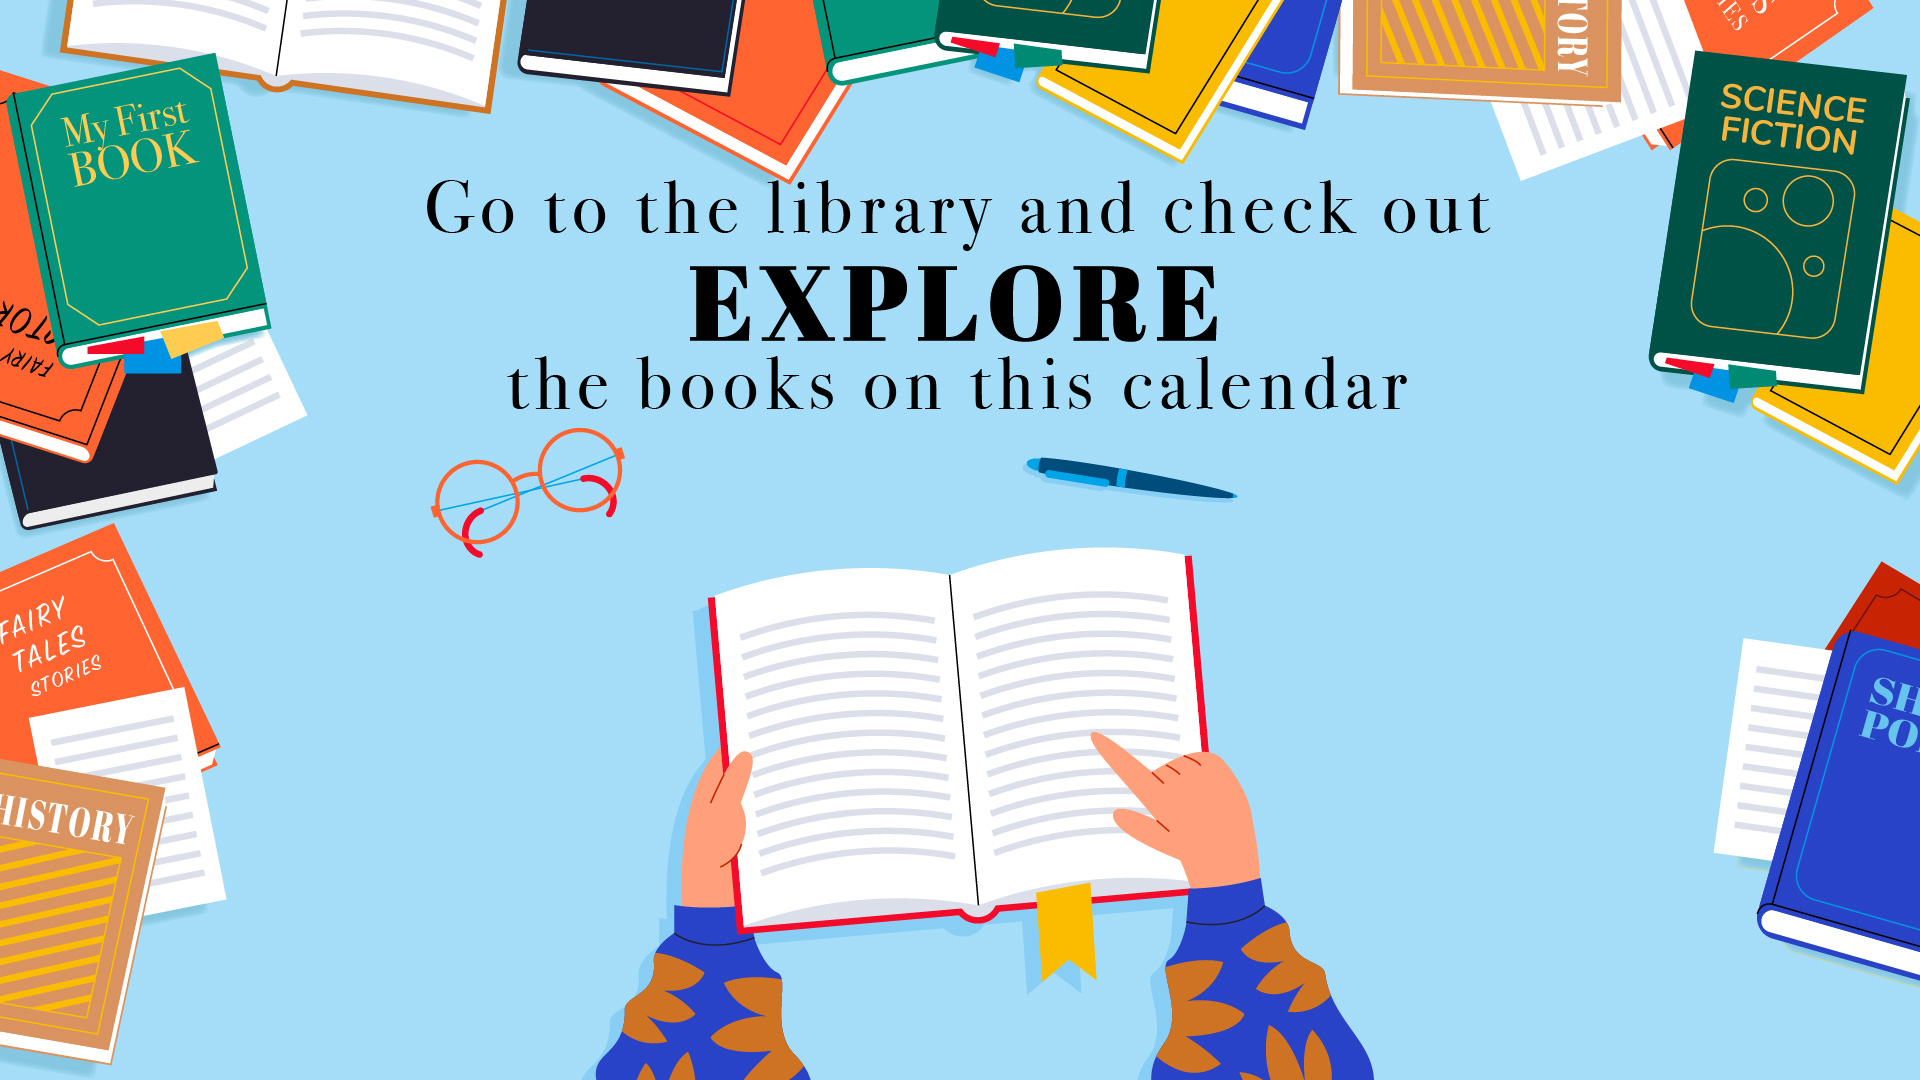 Books border, headline- first line: Go to the library and check out second line: EXPLORE third line: the books on this calendar graphics of orange glasses, blue pen, a person opening a book and point at the line.